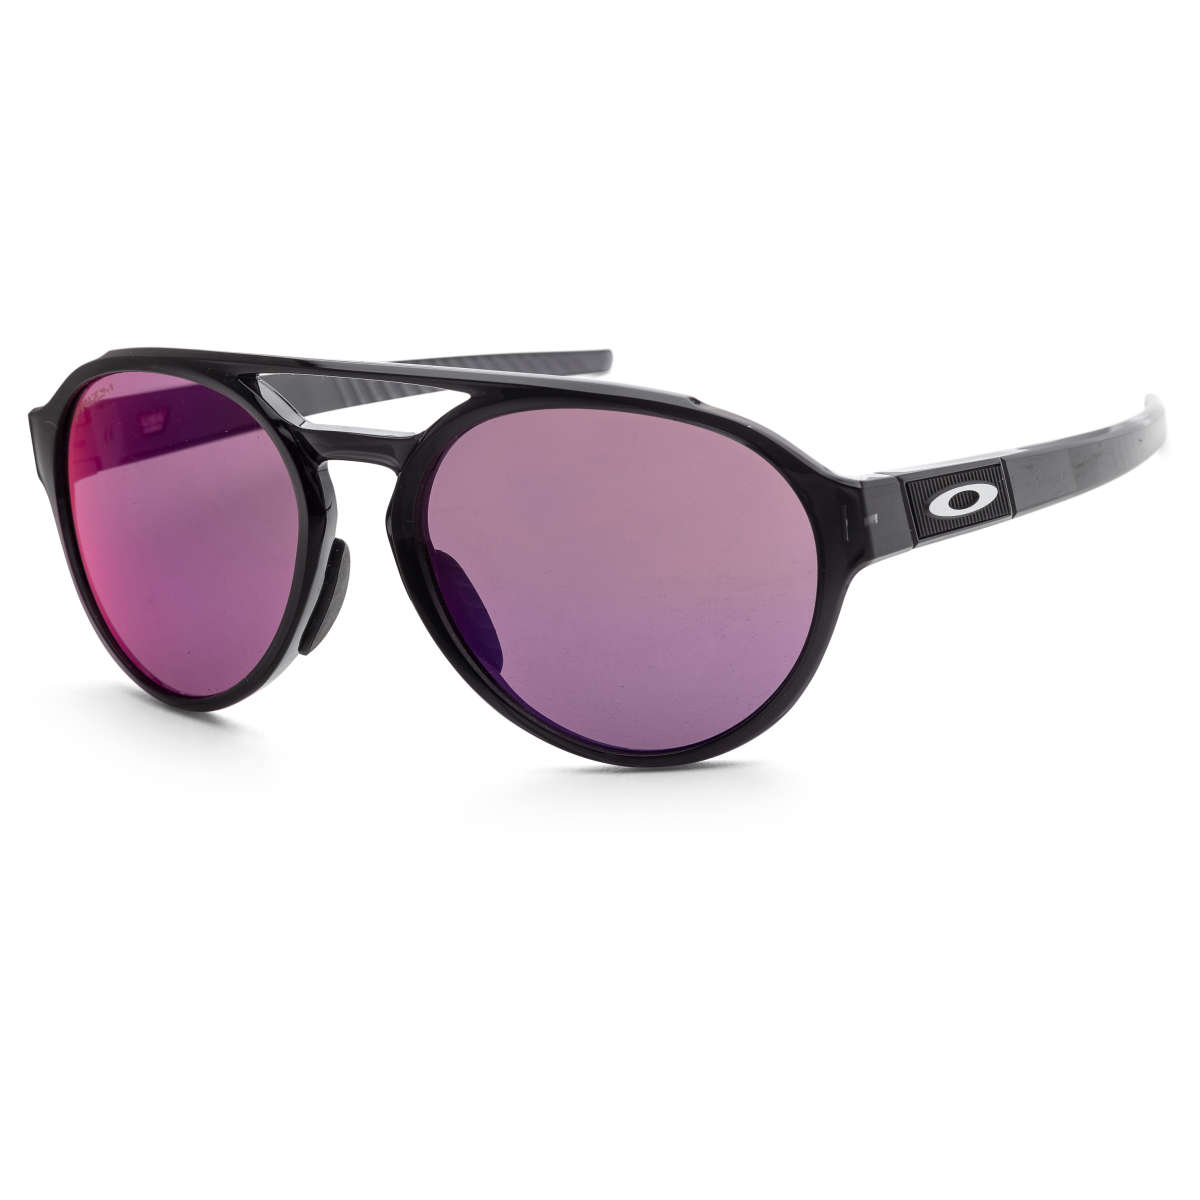 Oakley Men's Forager Sunglasses (Grey, Purple or Pink Lens) $49 & More + Free Shipping